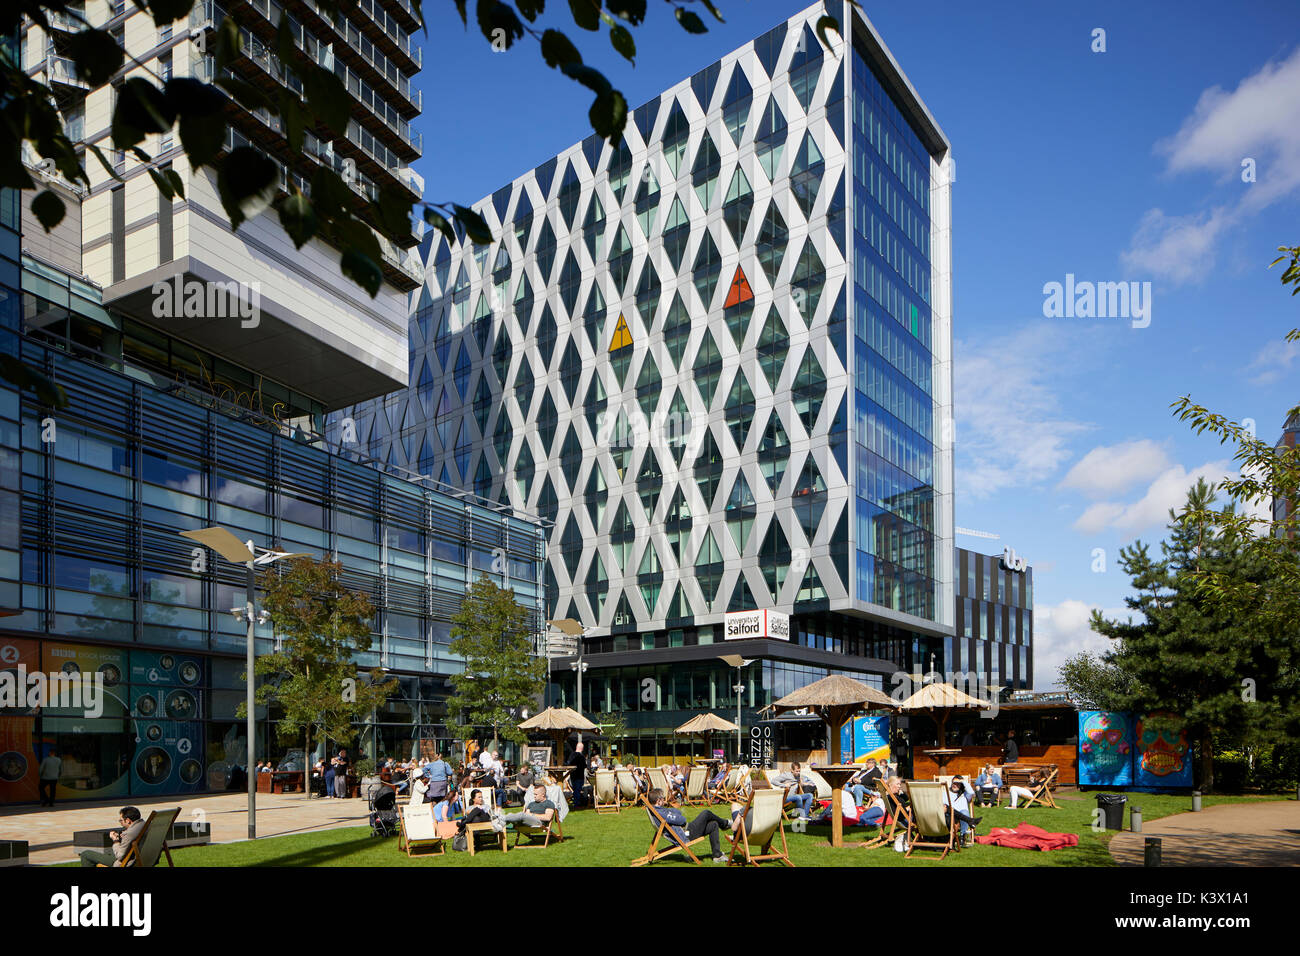 Regeneration docks at MediaCityUk at Salford Quays Gtr Manchester, BBC ITV offices Salford University and bars restaurants, people drinking relaxing o Stock Photo